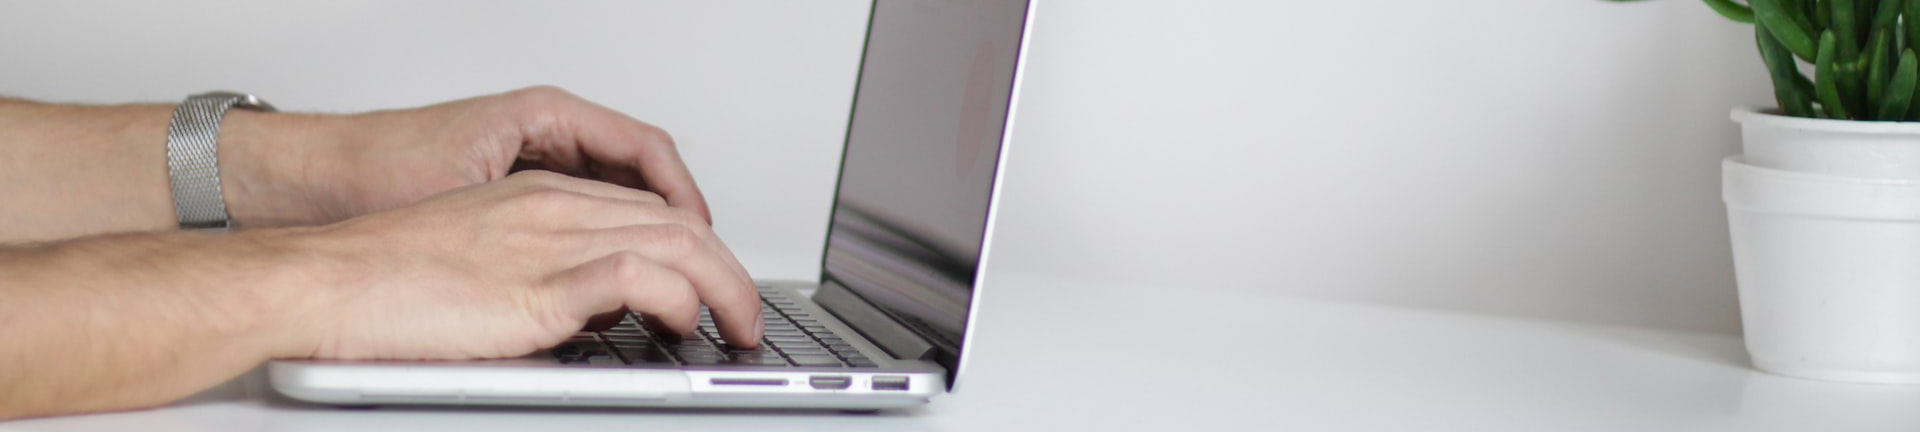 A photo of two hands typing on the keyboard of a laptop computer